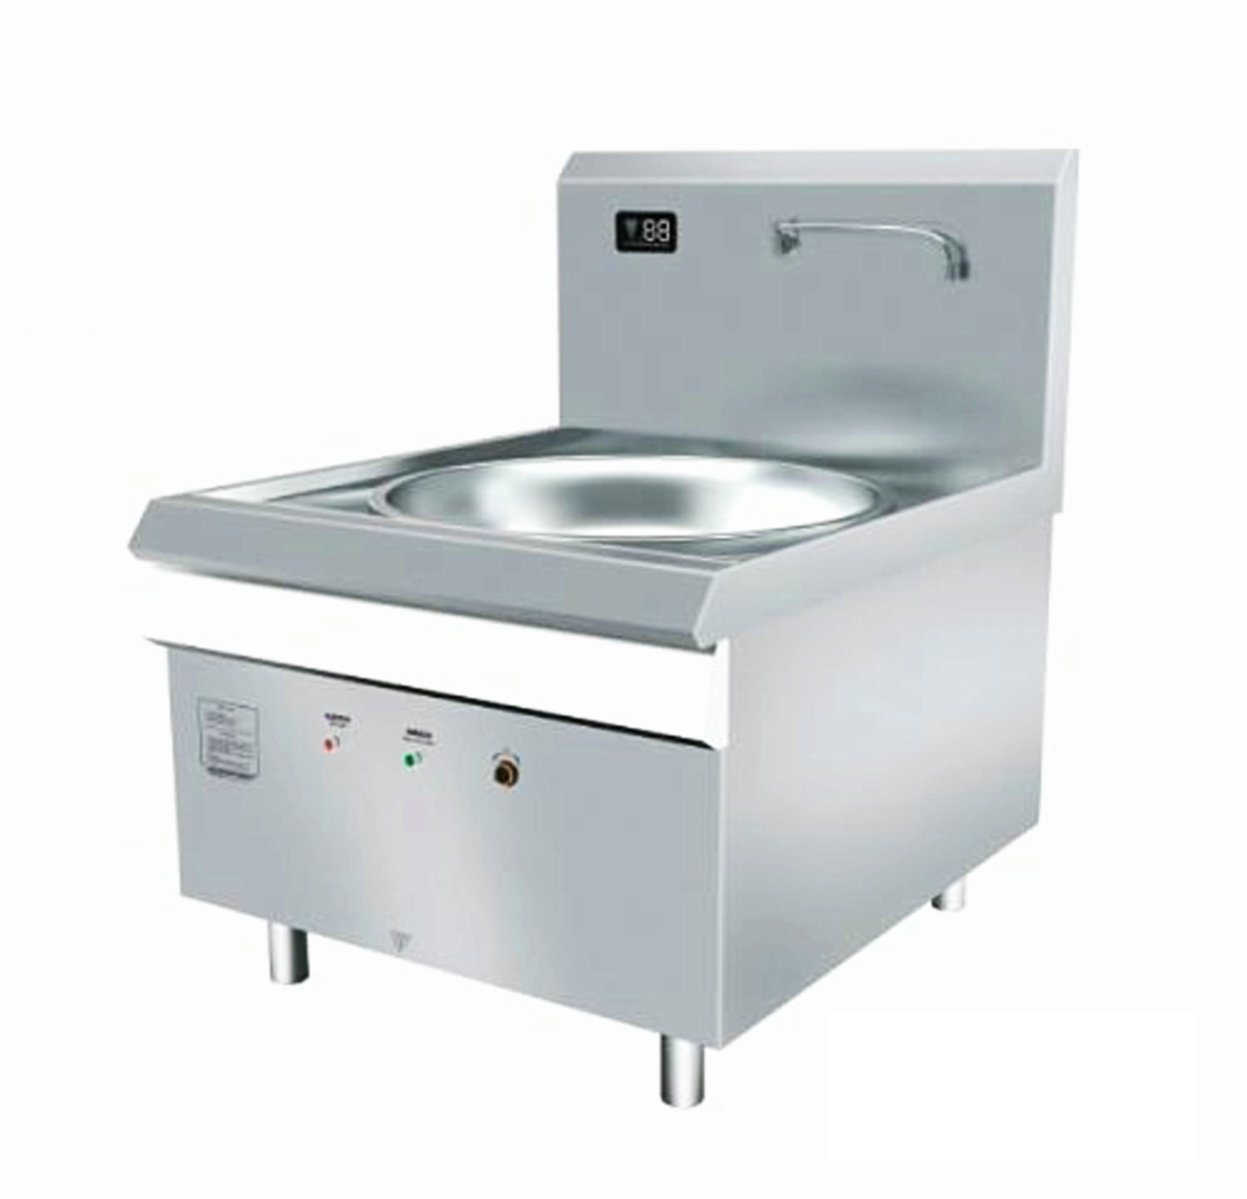 Marine Electric Cooking Equipment